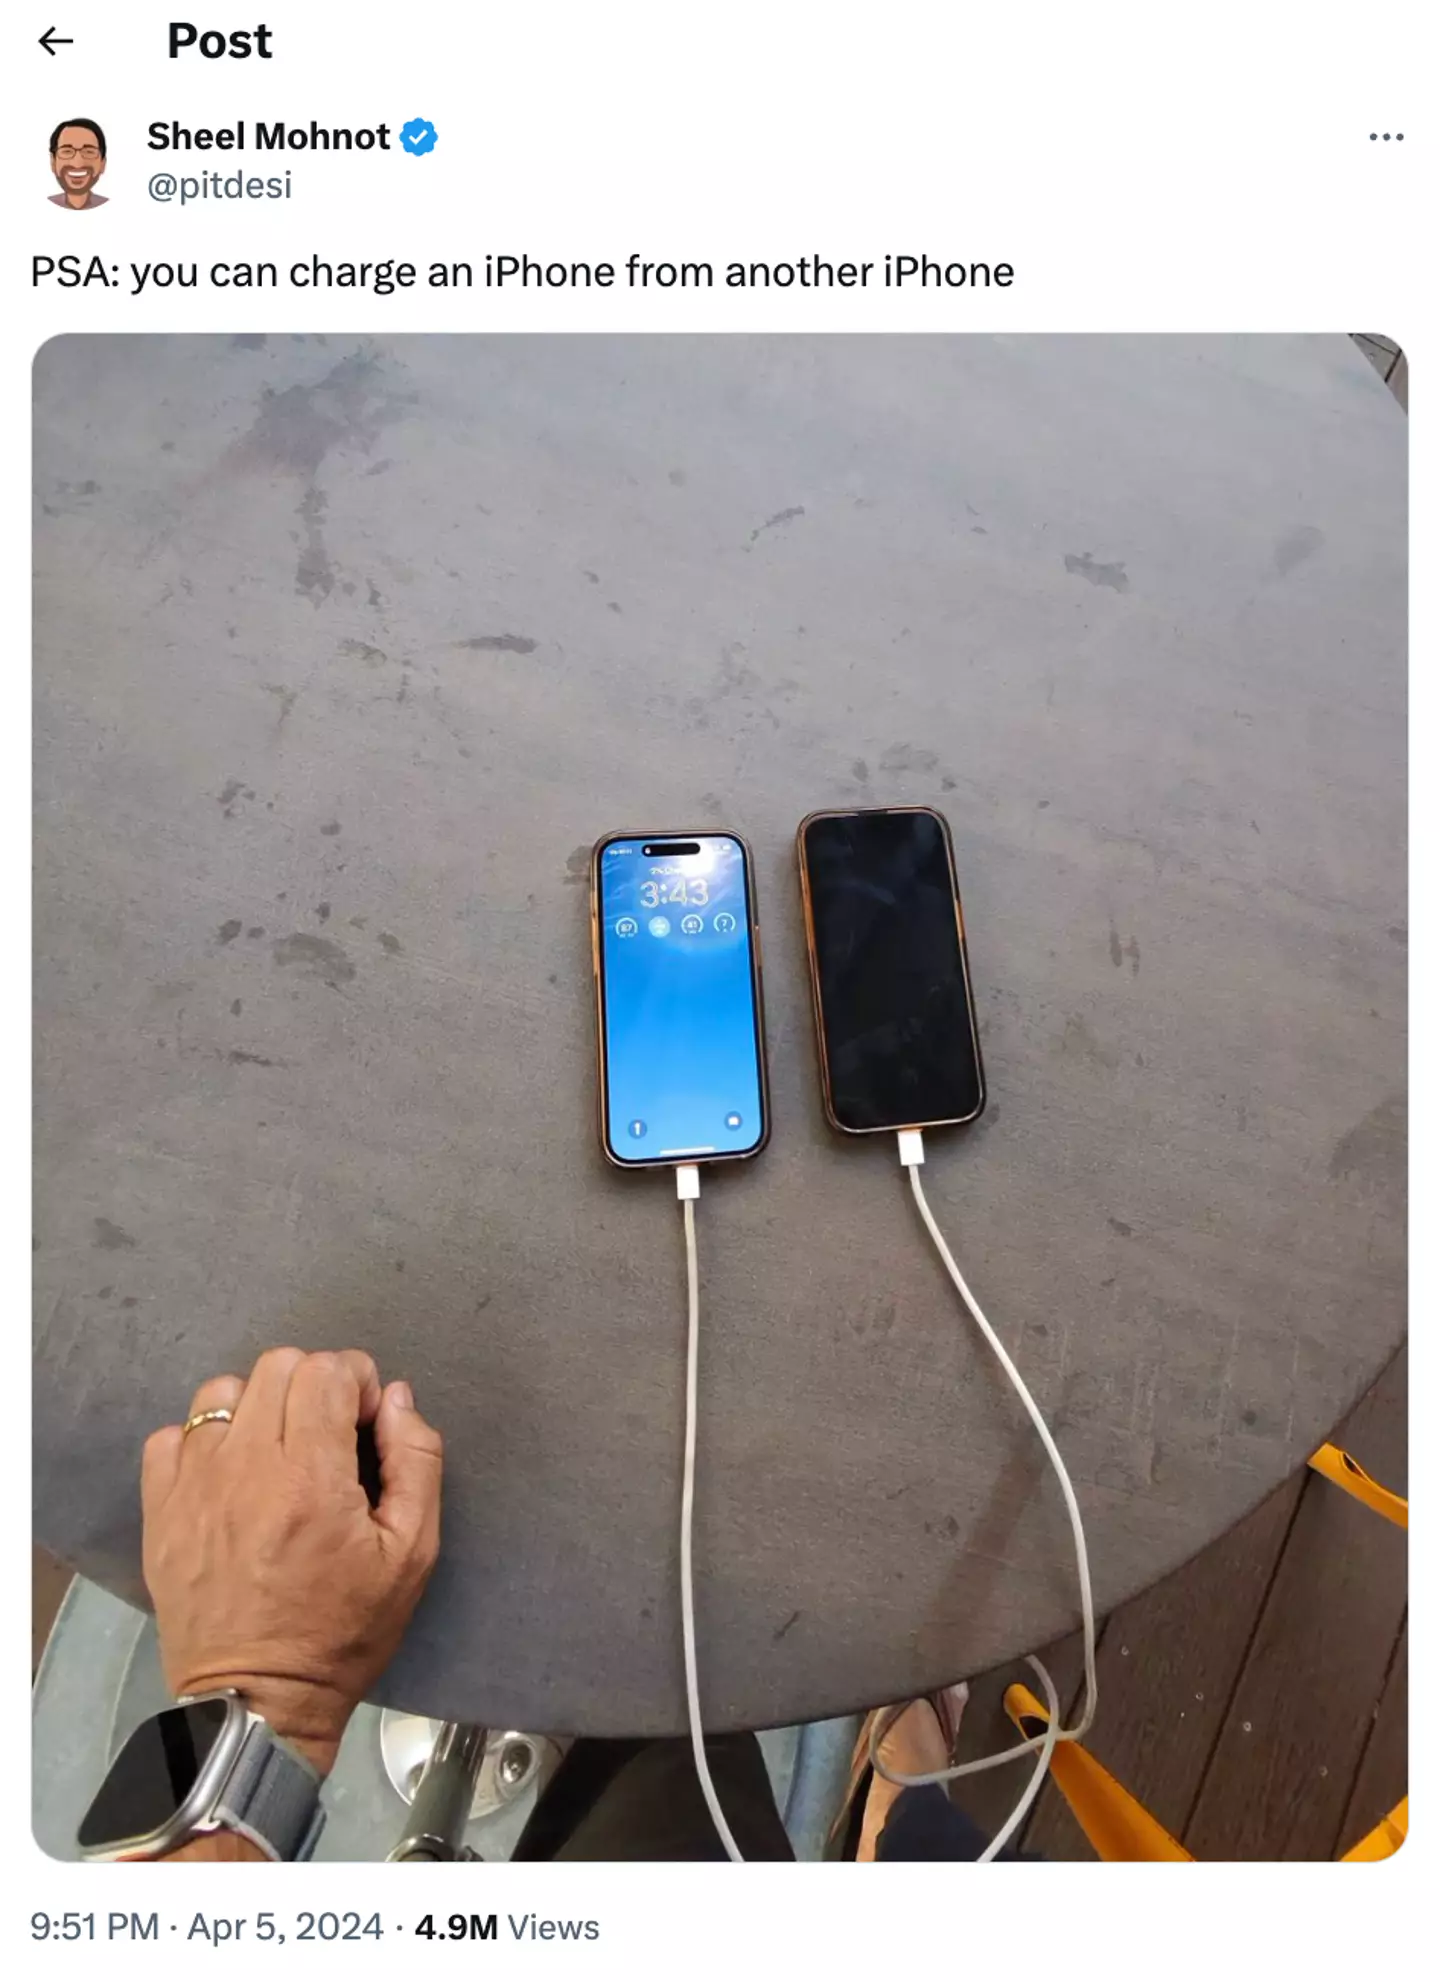 You can charge an iPhone with another iPhone. X/@pitdesi